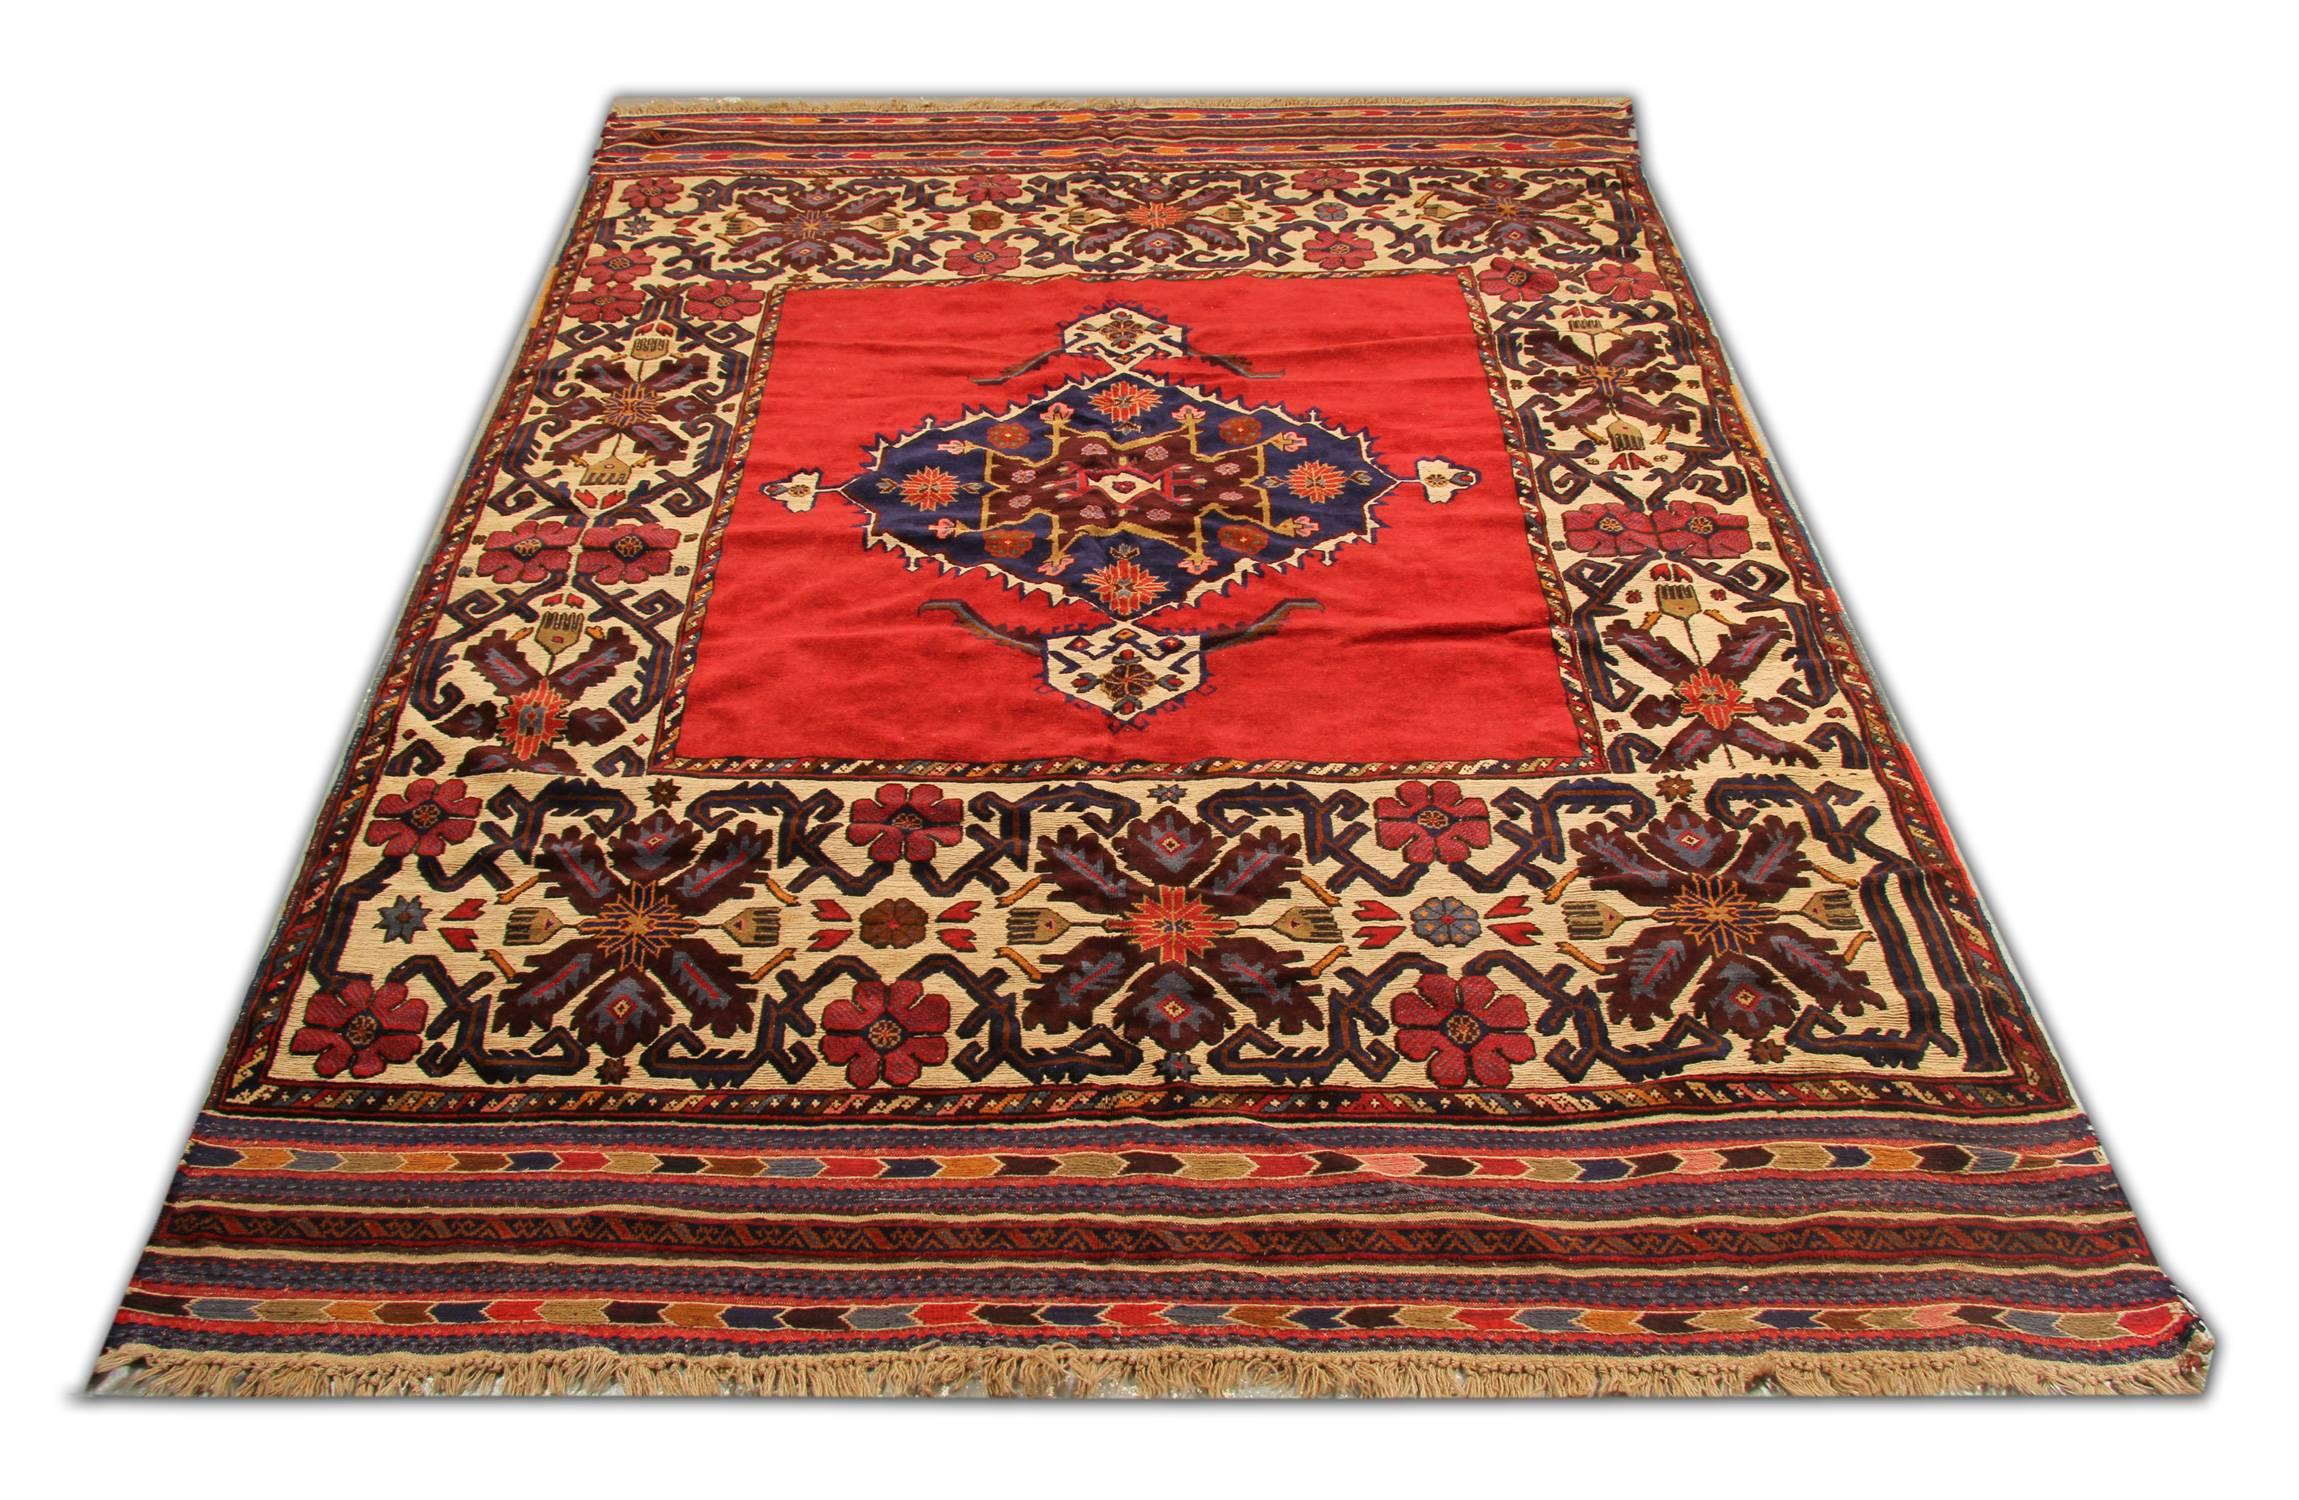 This wool rug was handwoven in Afghanistan in 1970. It features a highly detailed central medallion woven onto a red background. This is enclosed by a decorative repeat pattern floral motif border. The color and design in this fine wool rug make it